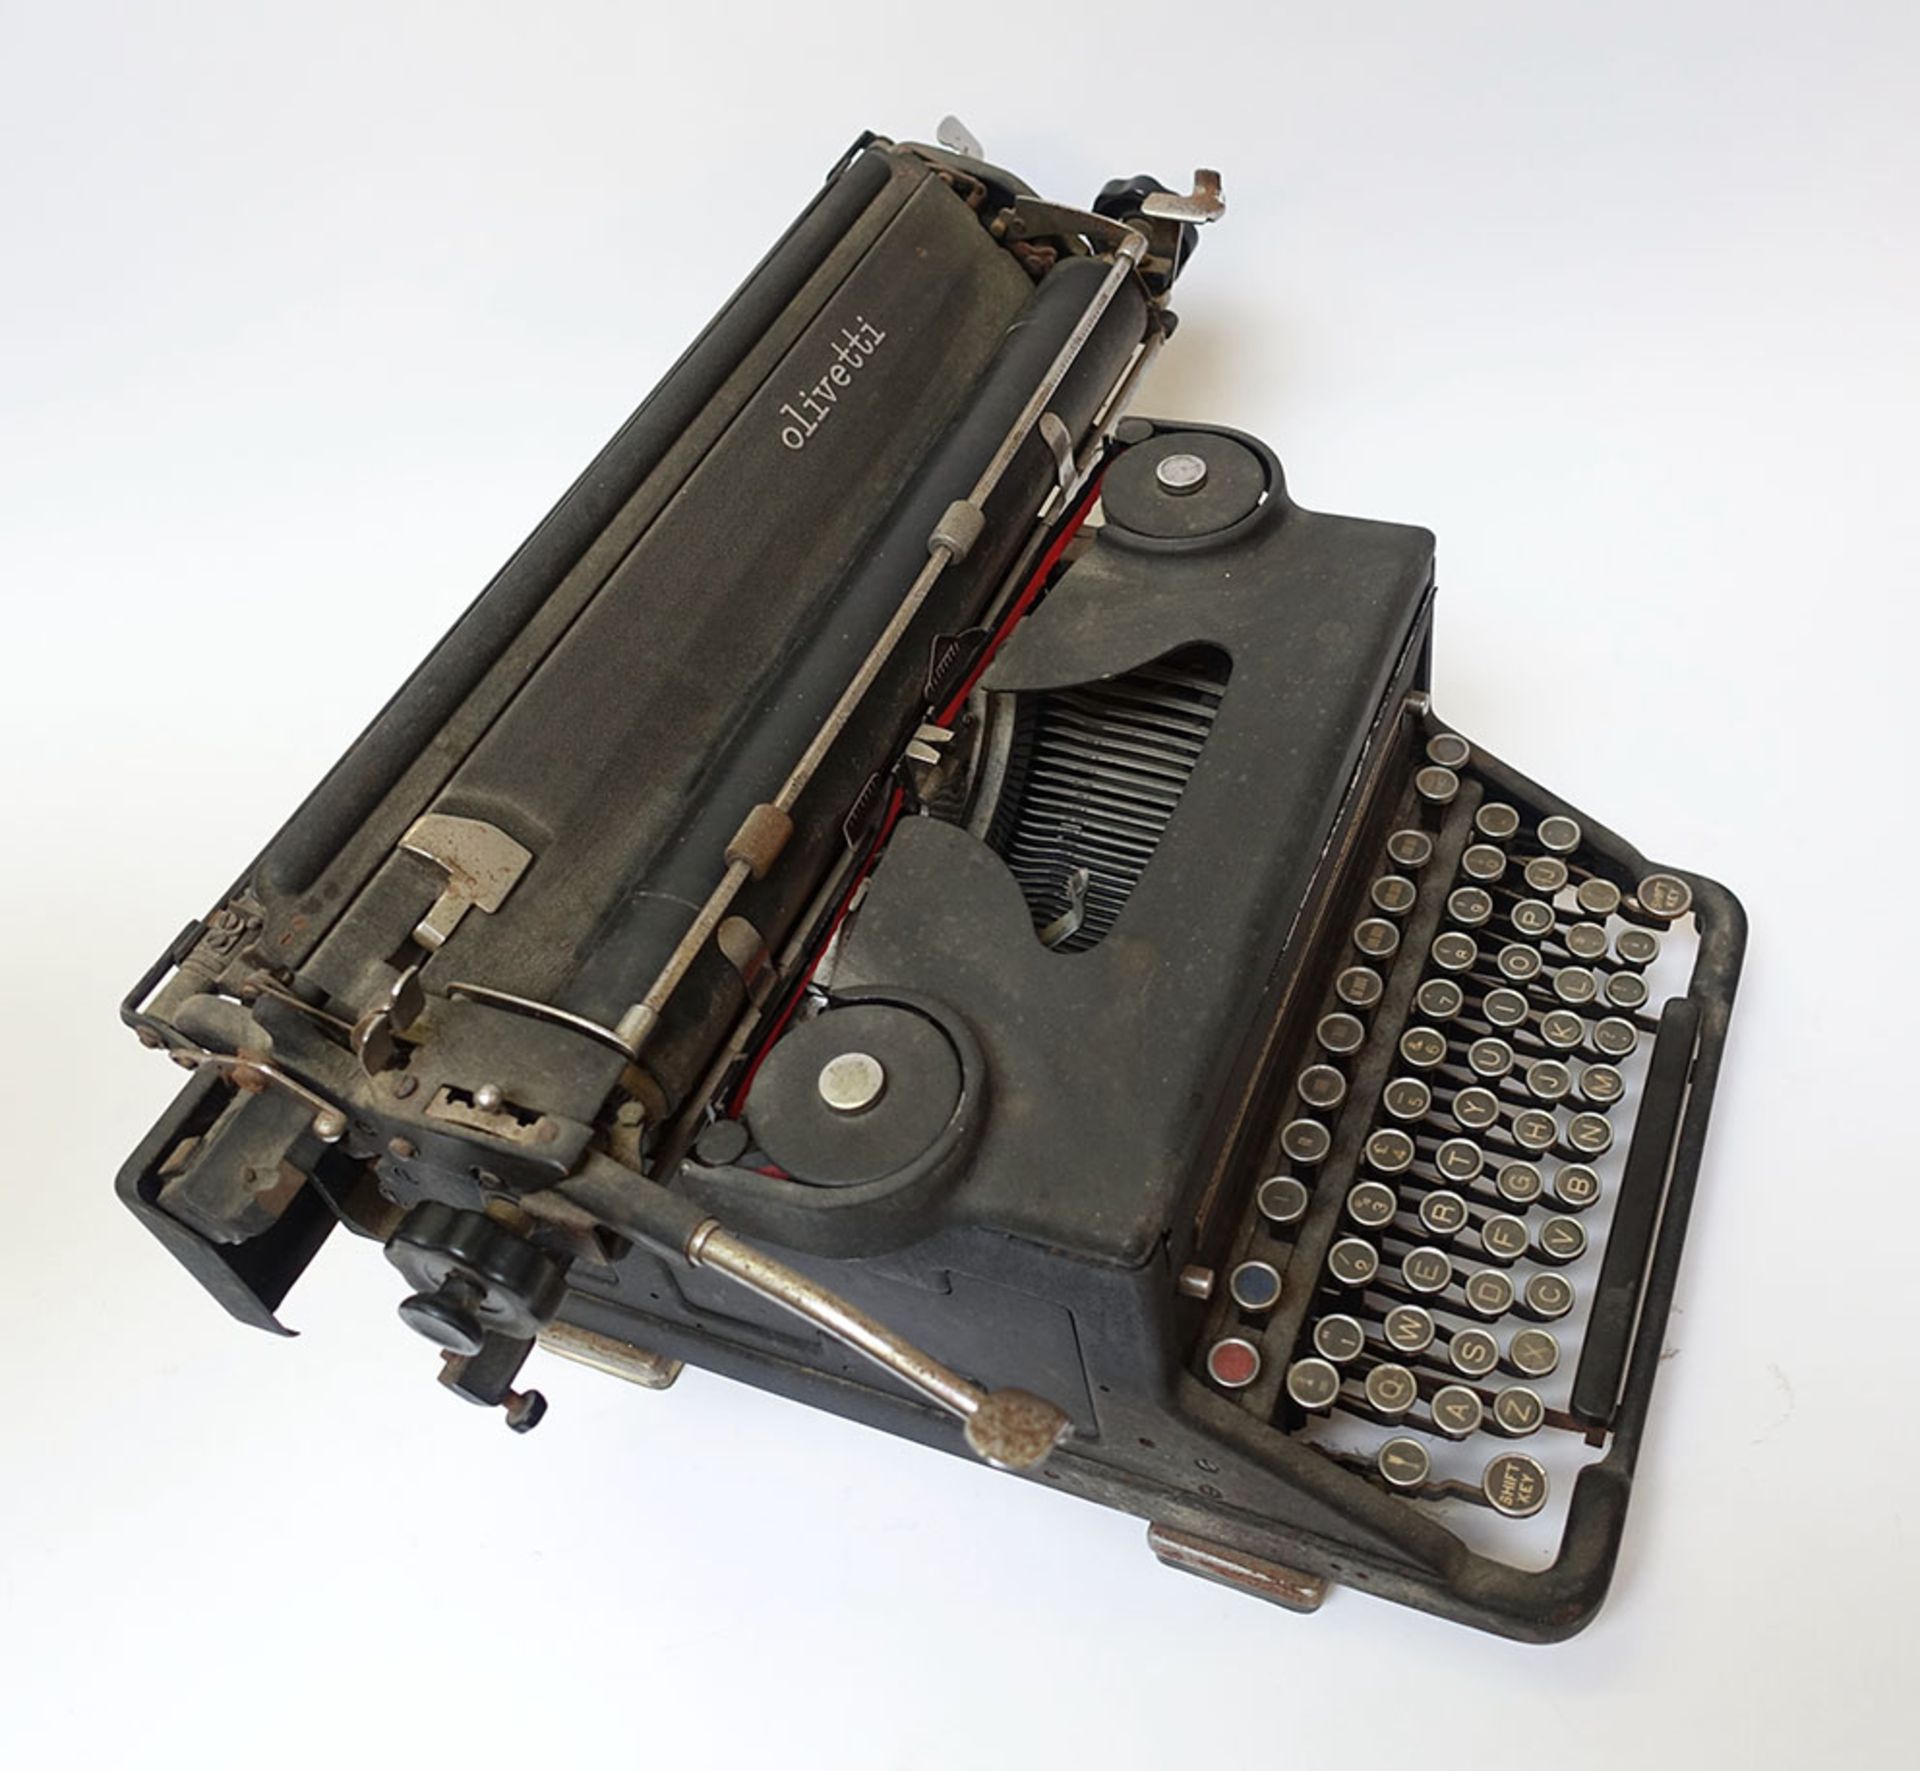 OLIVETTI M40/3 TYPEWRITER. Italy, years of production 1946/47. Amost 18 kg. - Sold without any - Image 2 of 2